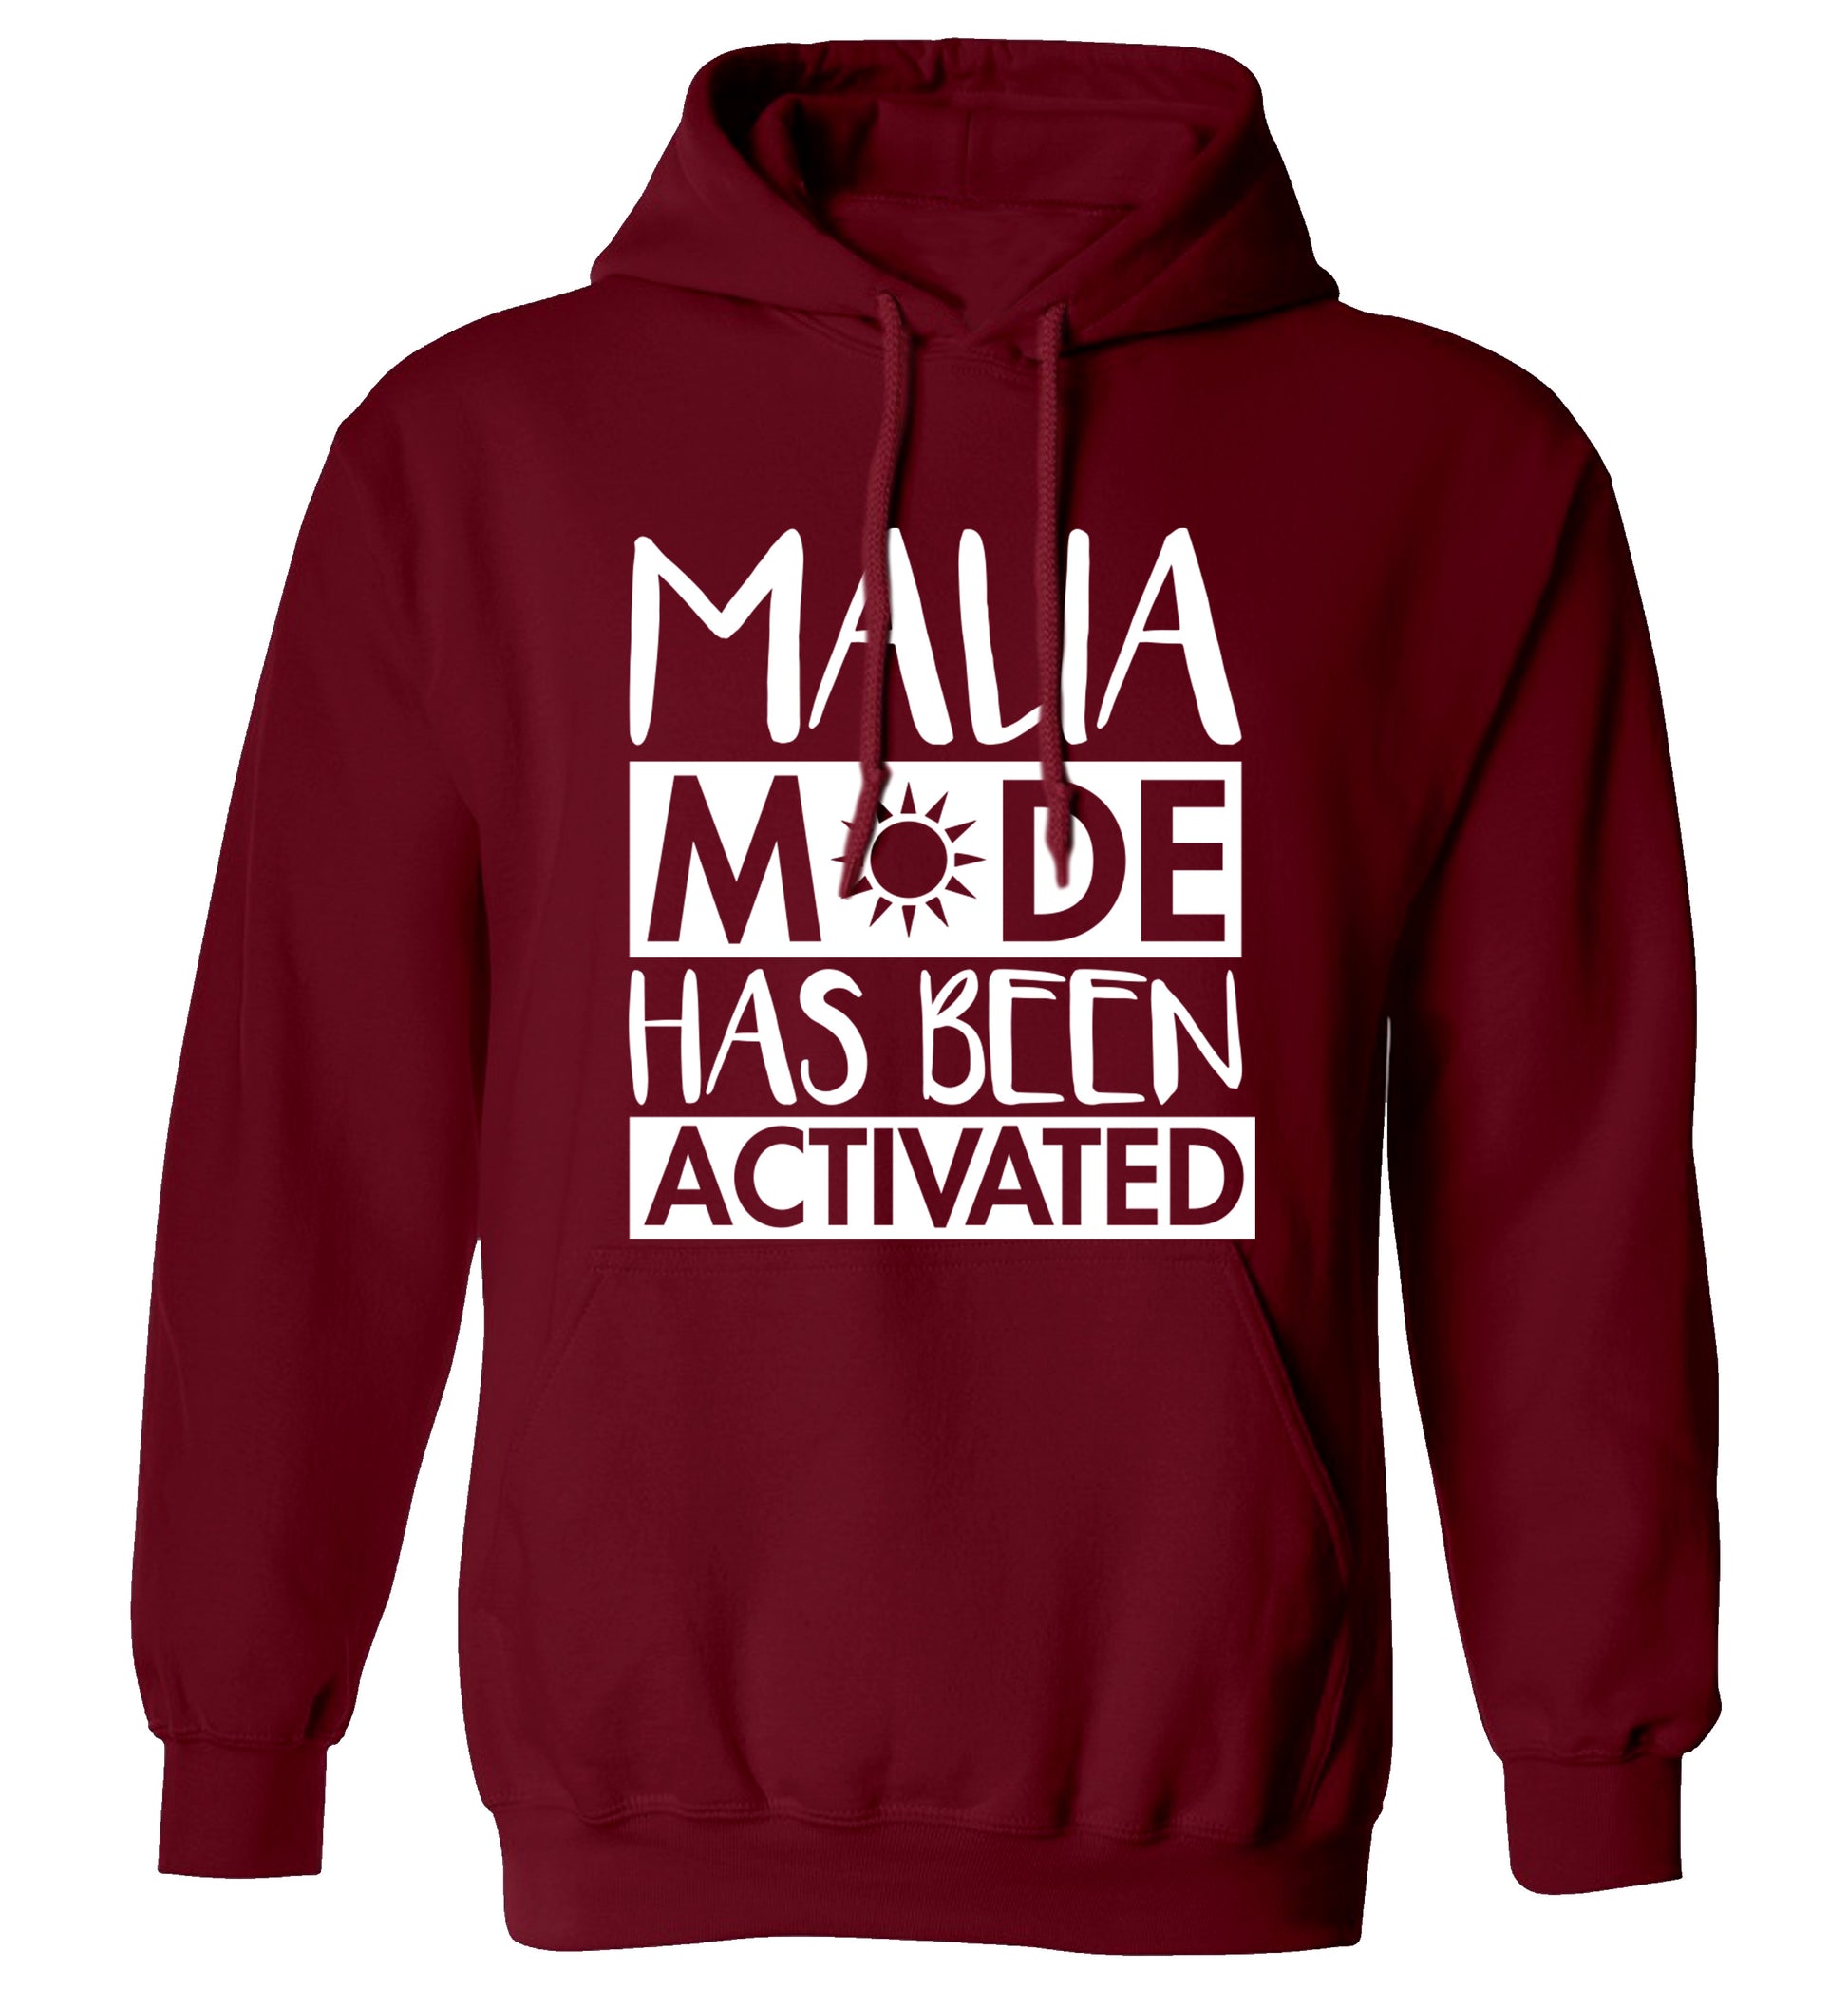 Malia mode has been activated adults unisex maroon hoodie 2XL